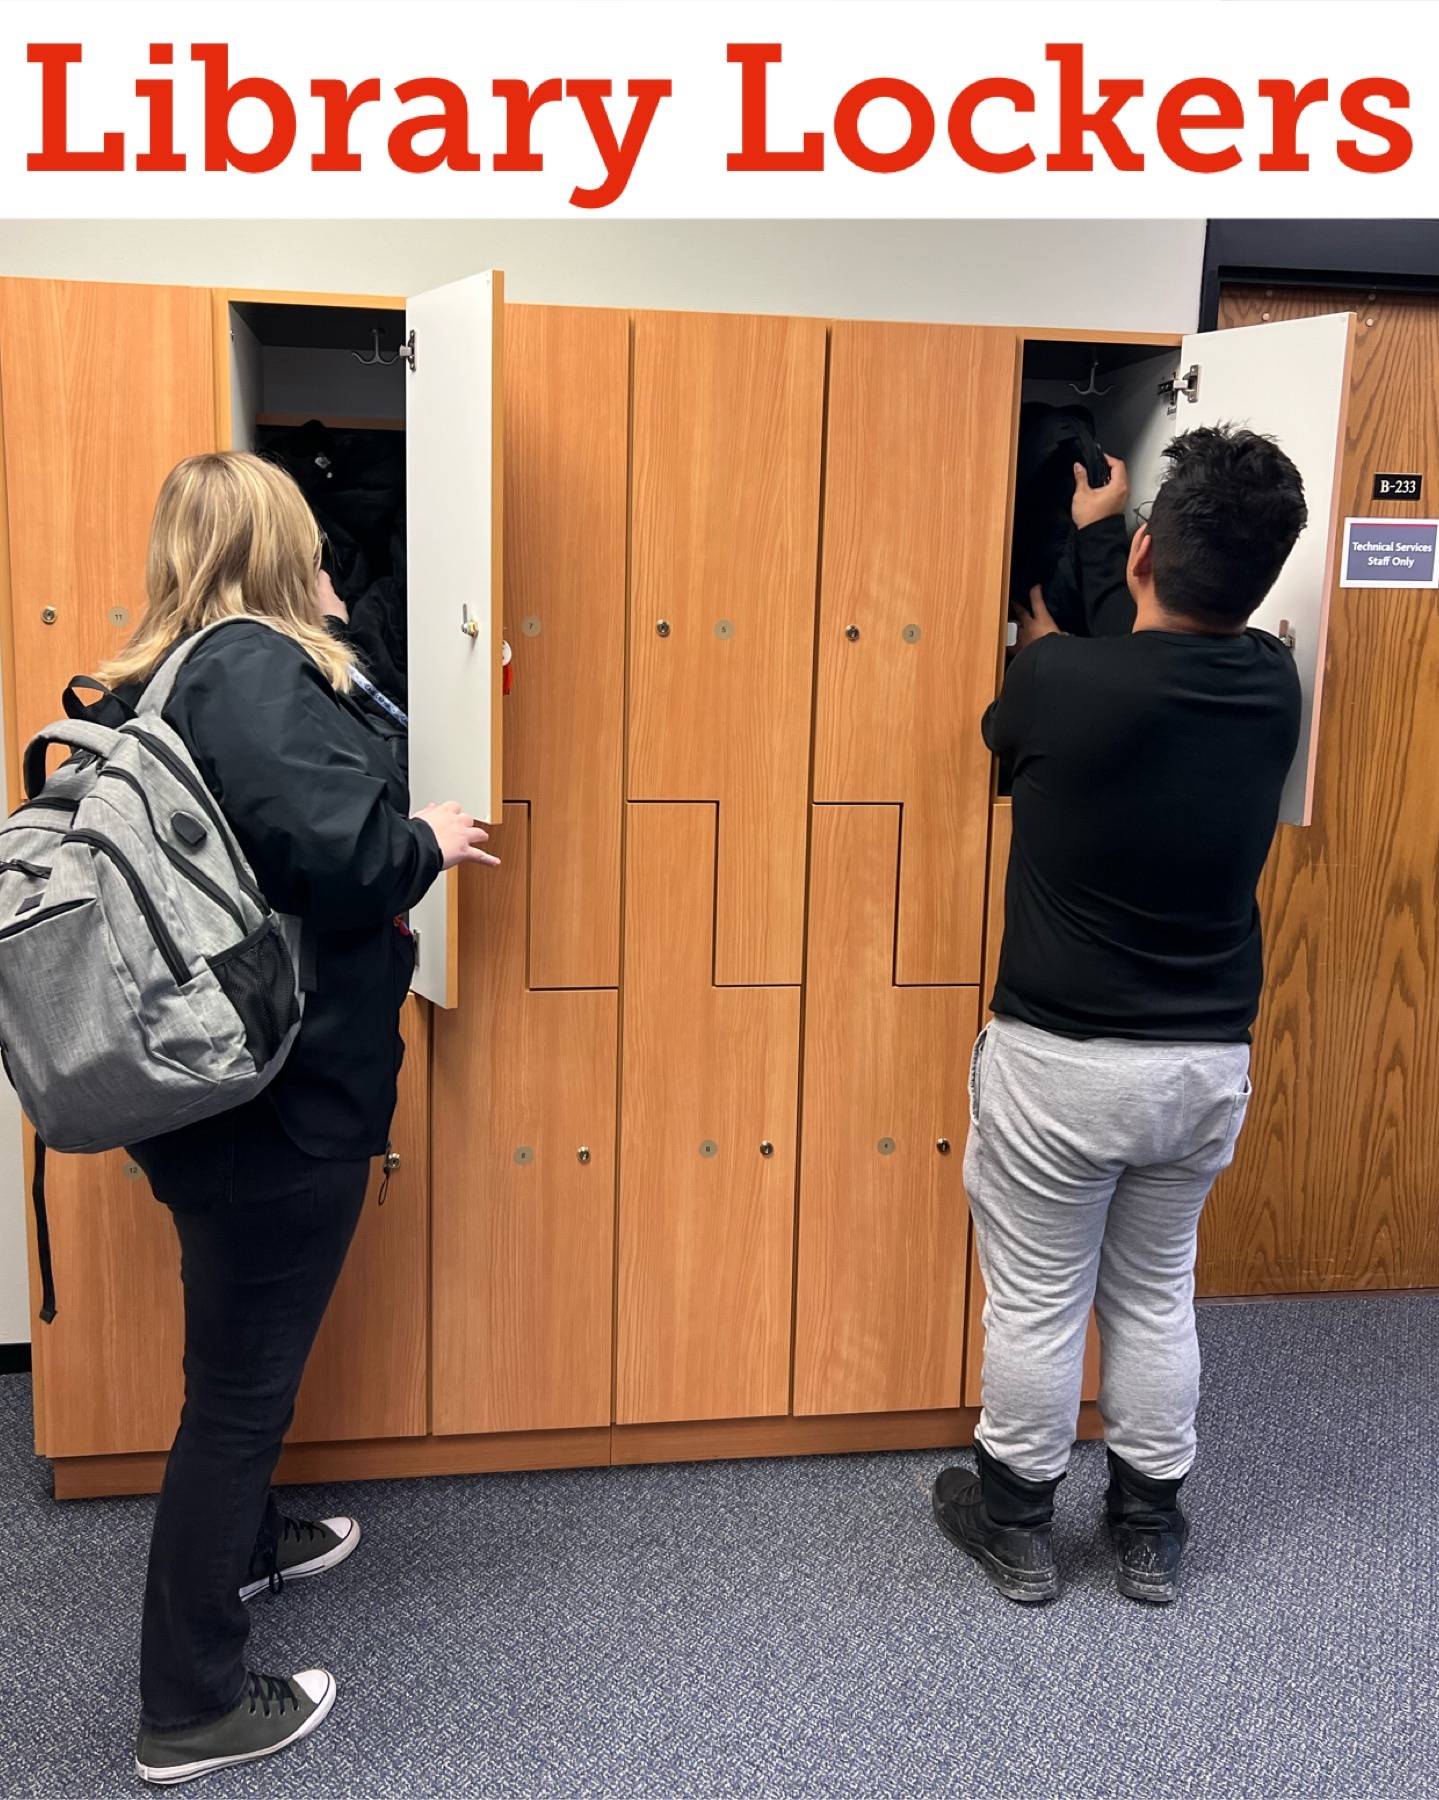 Students using the library lockers